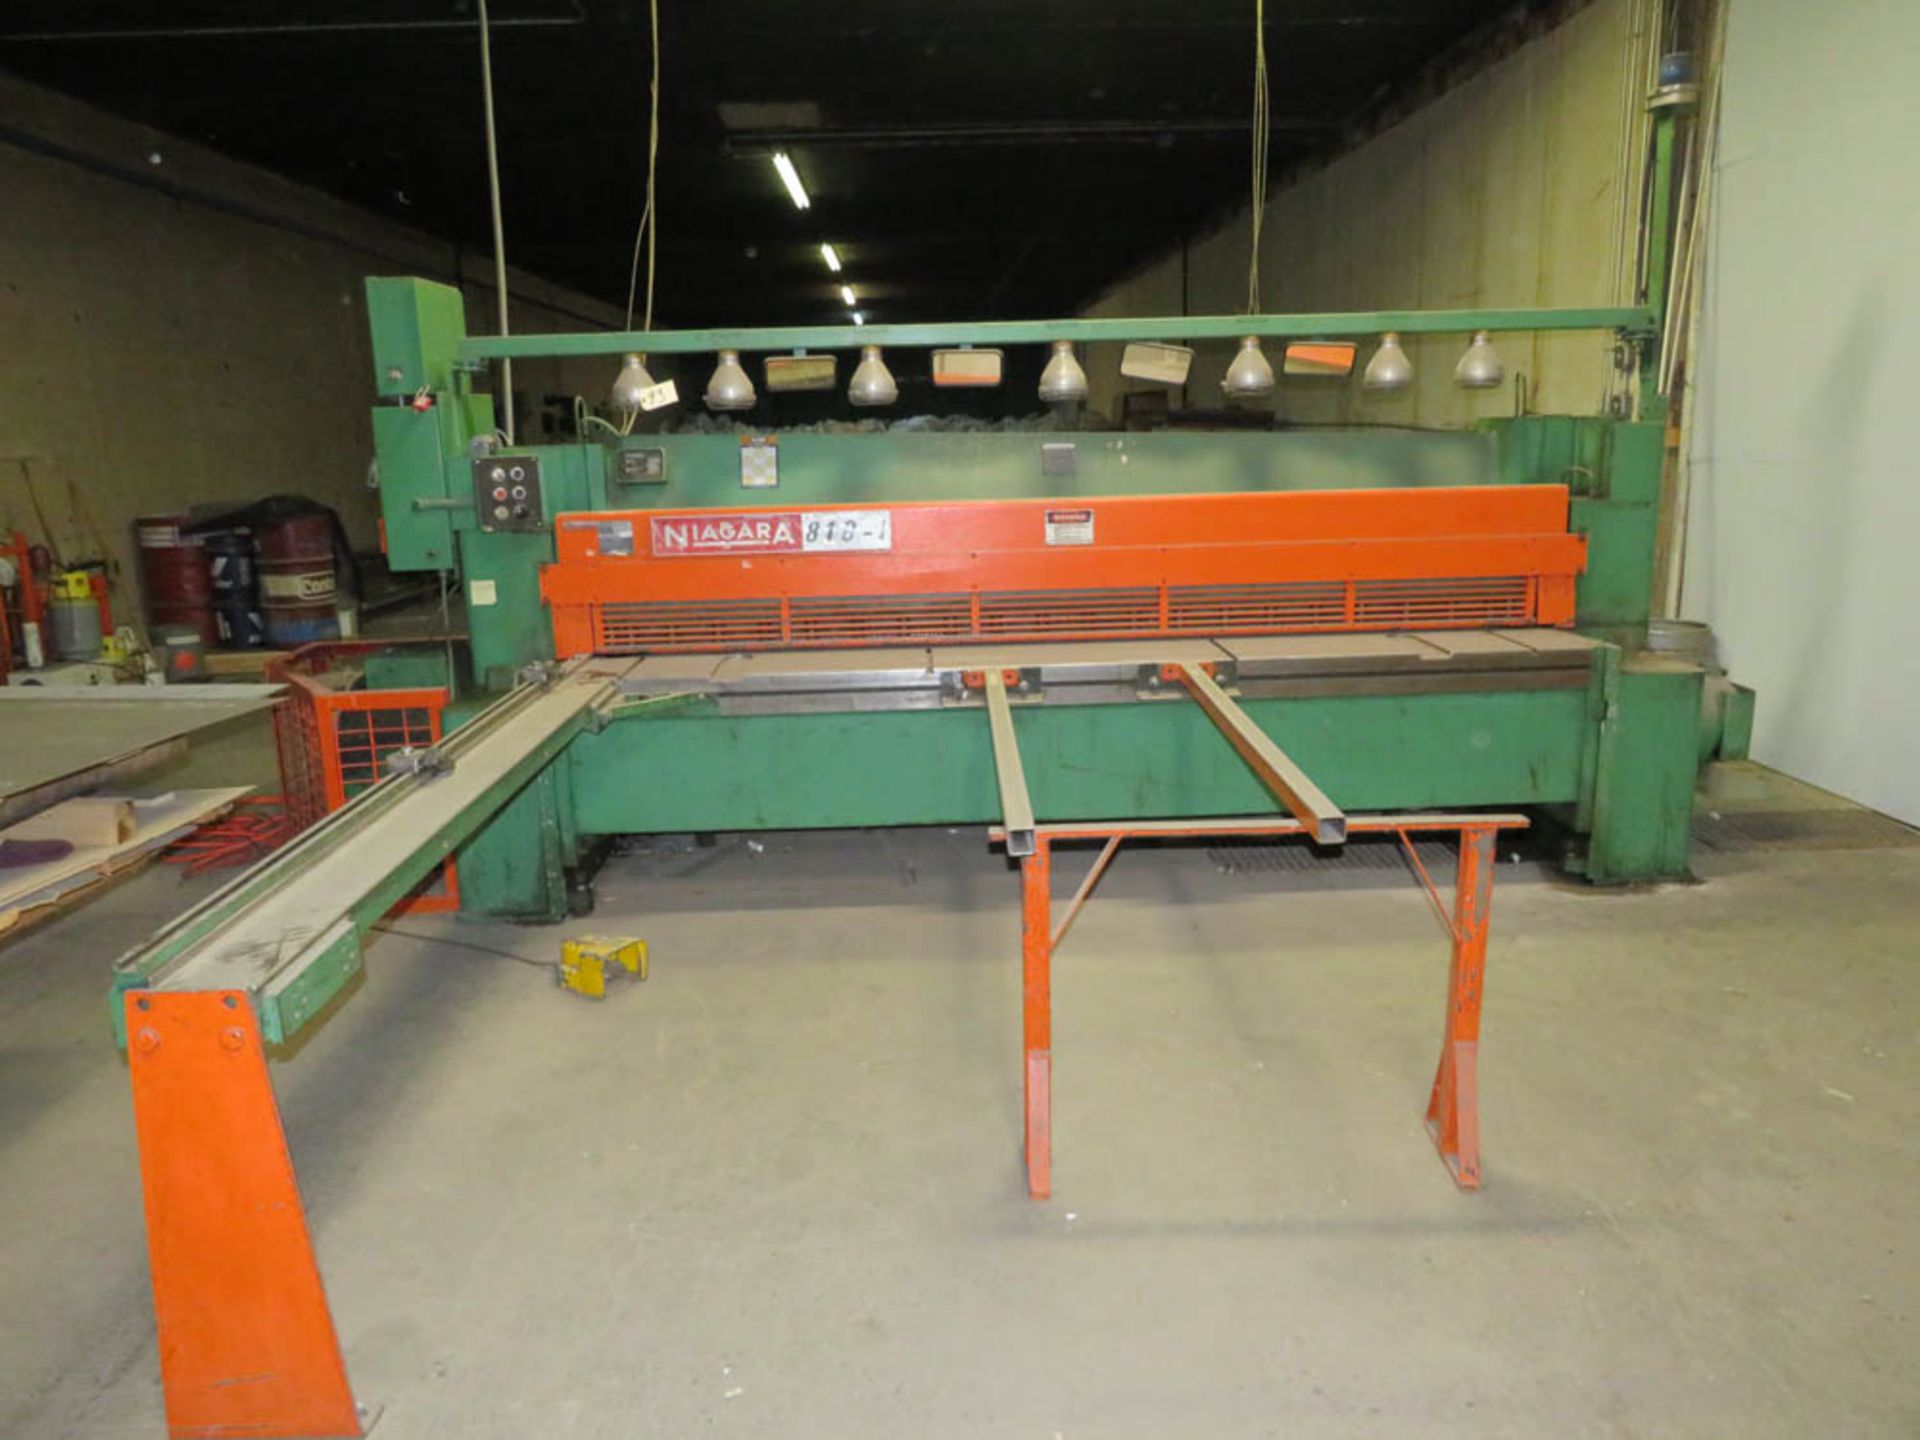 NIAGARA MDL. 810-1/4 POWER SQUARING SHEAR, WITH 120" SQUARING ARM, 36" FRONT OPERATED BACK GAUGE,